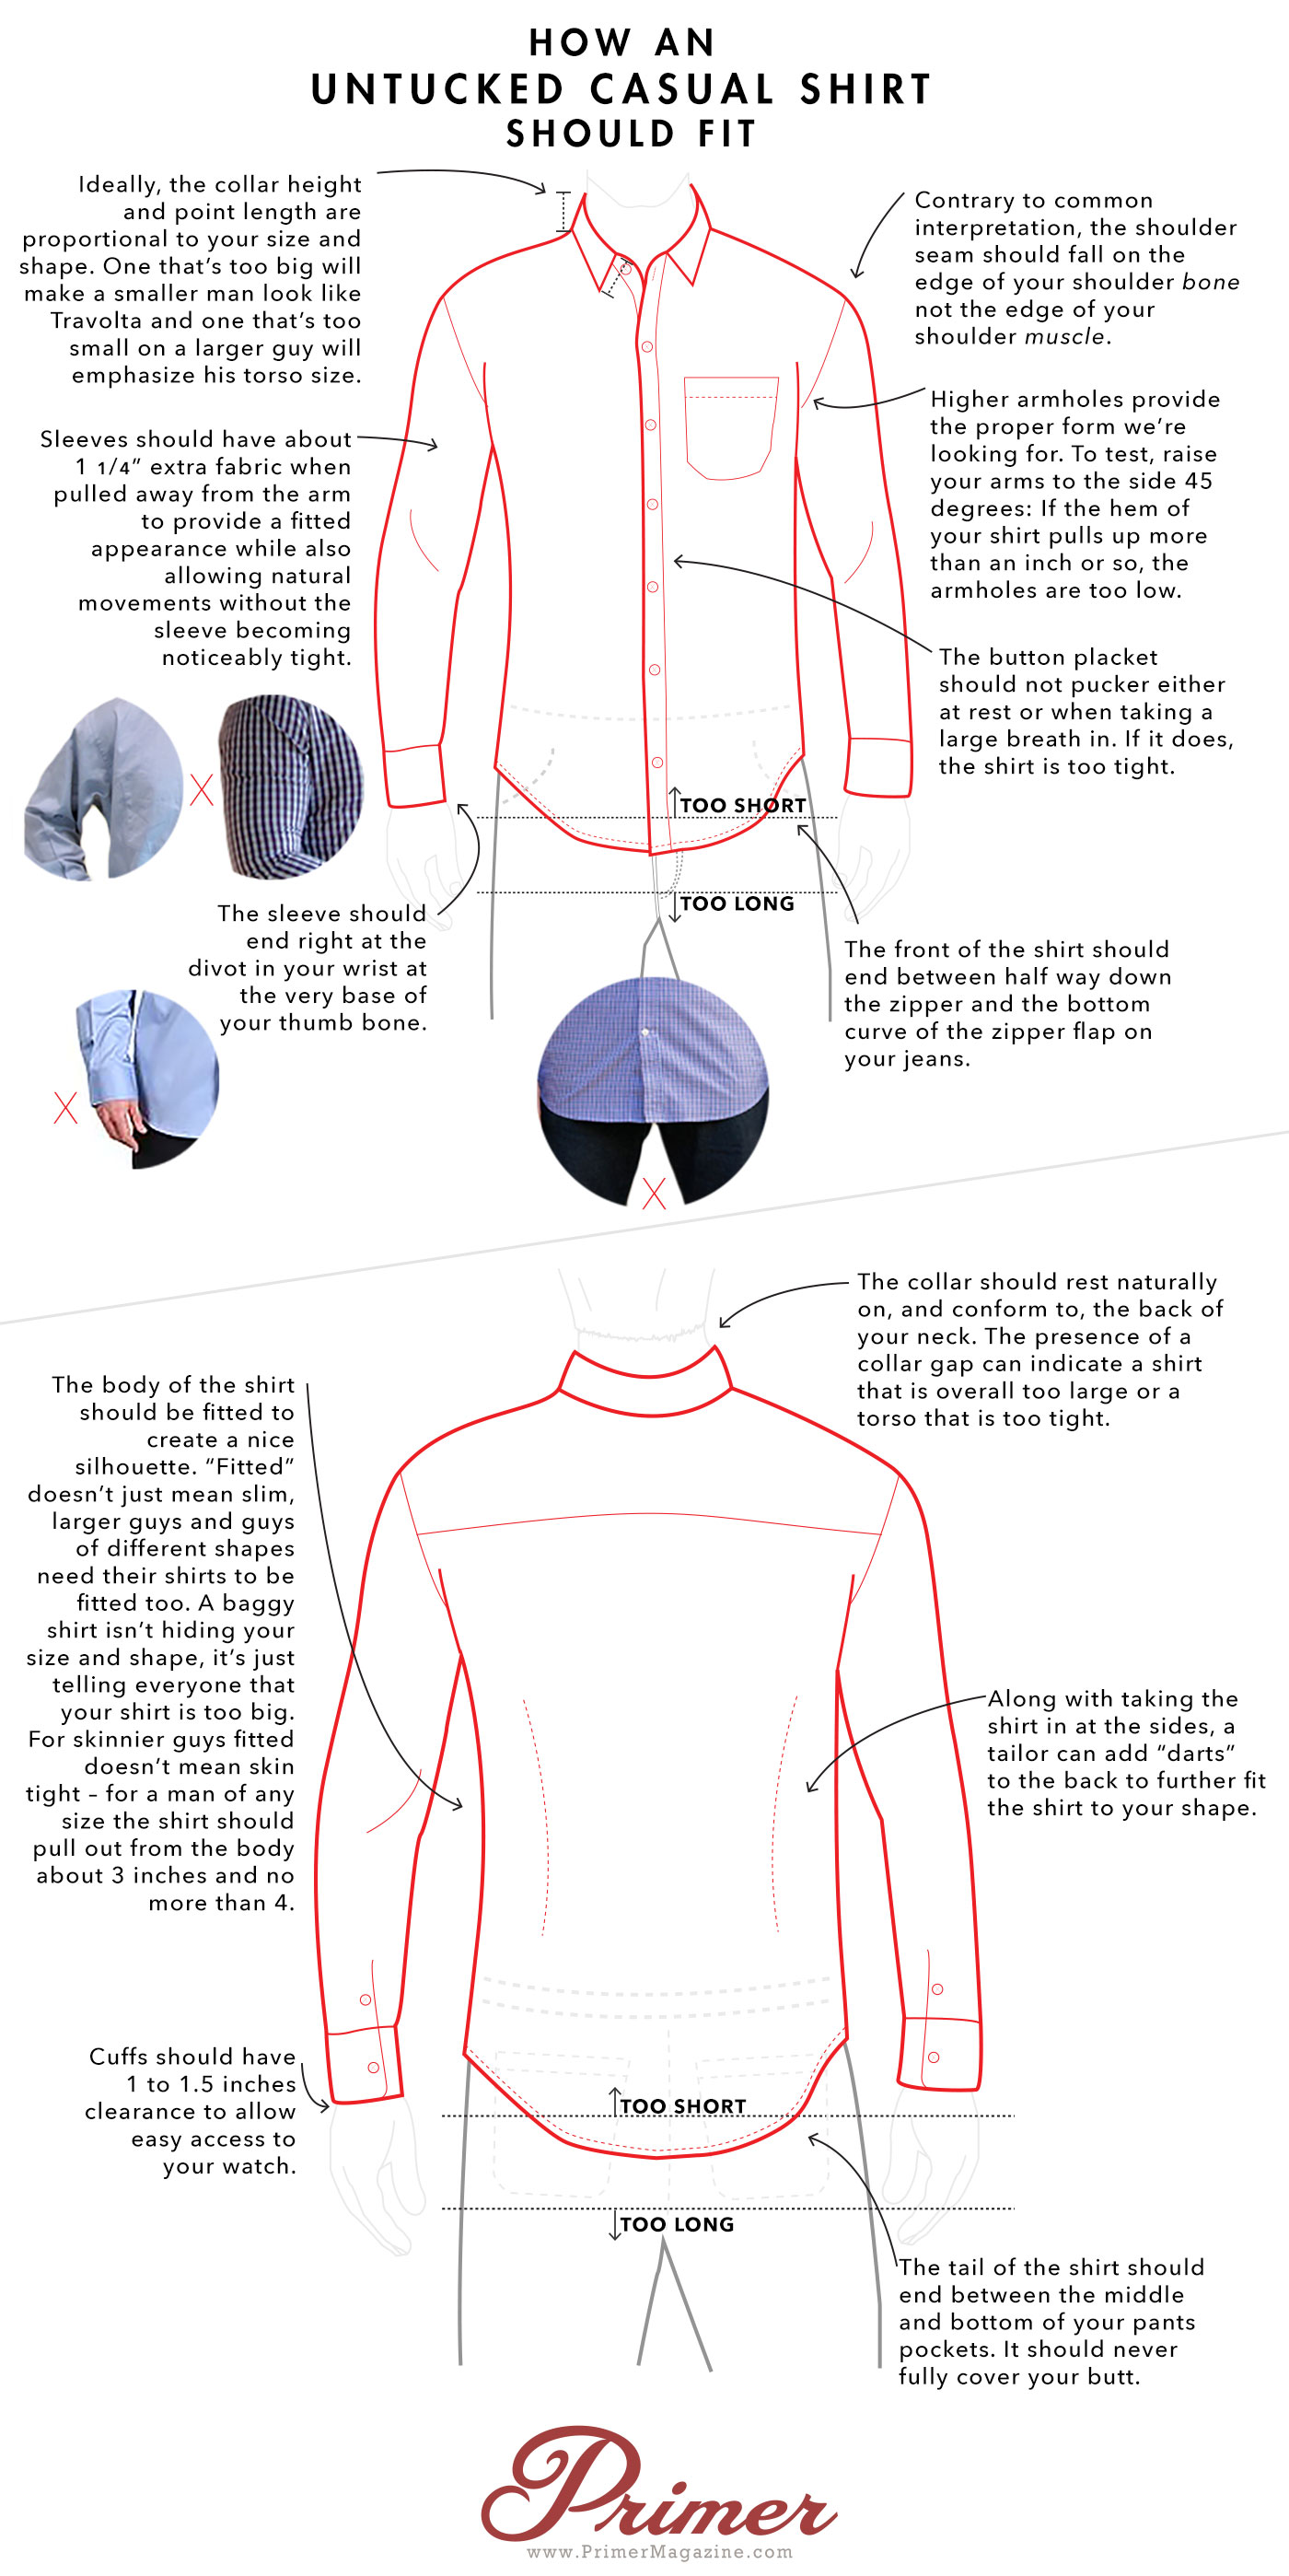 How an Untucked Casual Shirt Should Fit - A Visual Guide | Primer